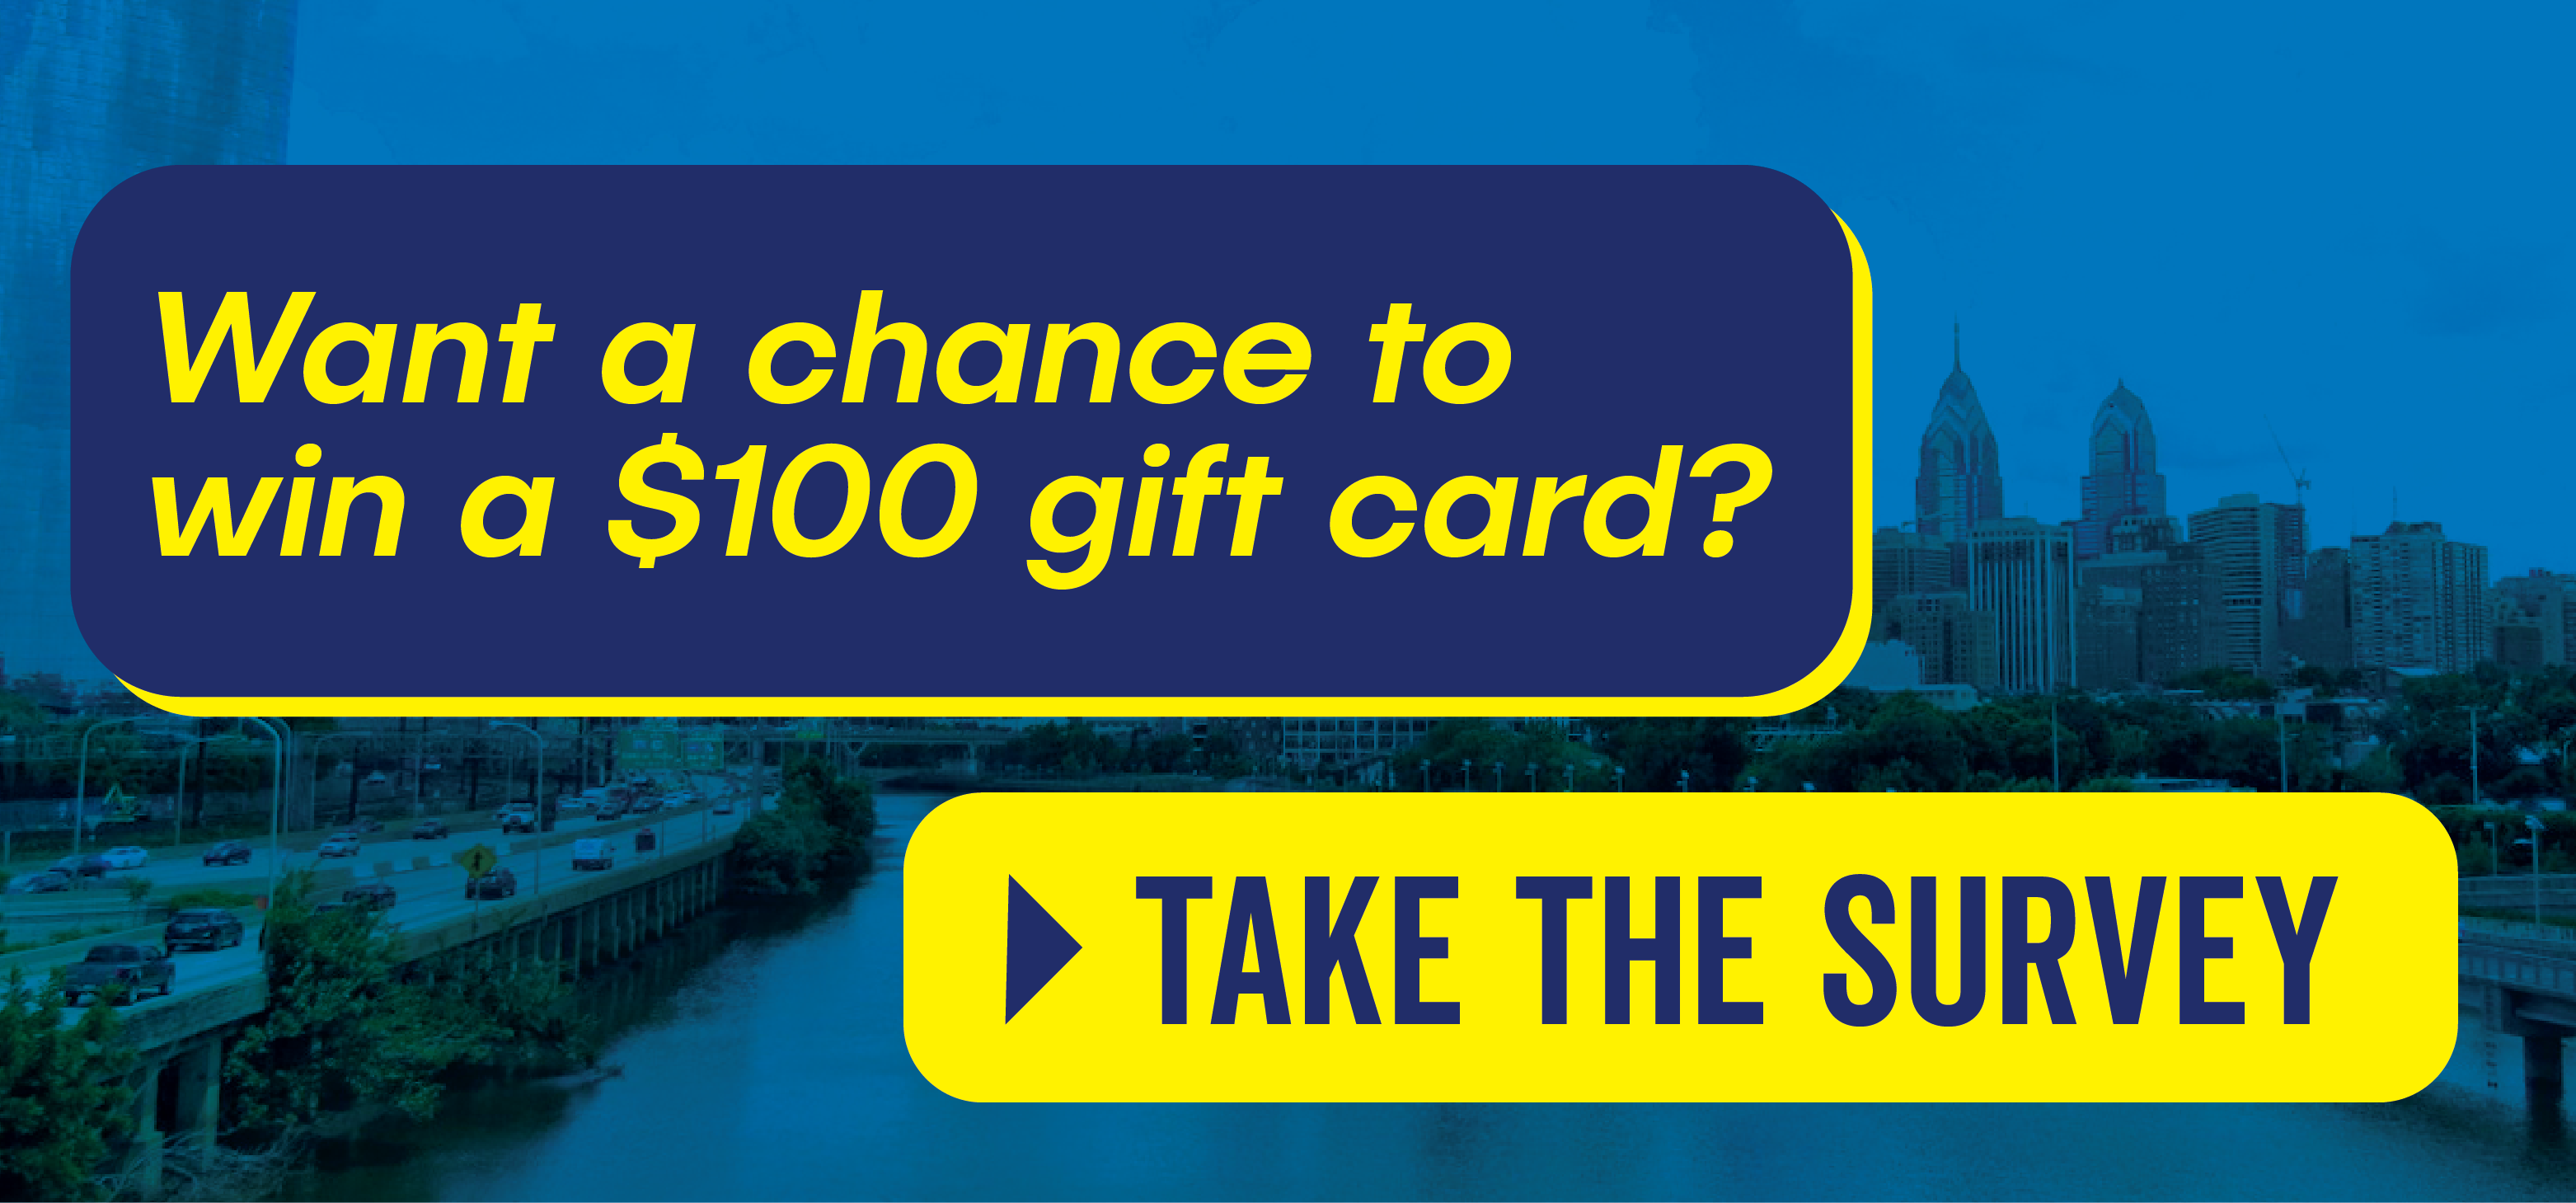 Want a chance to win a $100 gift card? Click here to take the survey!